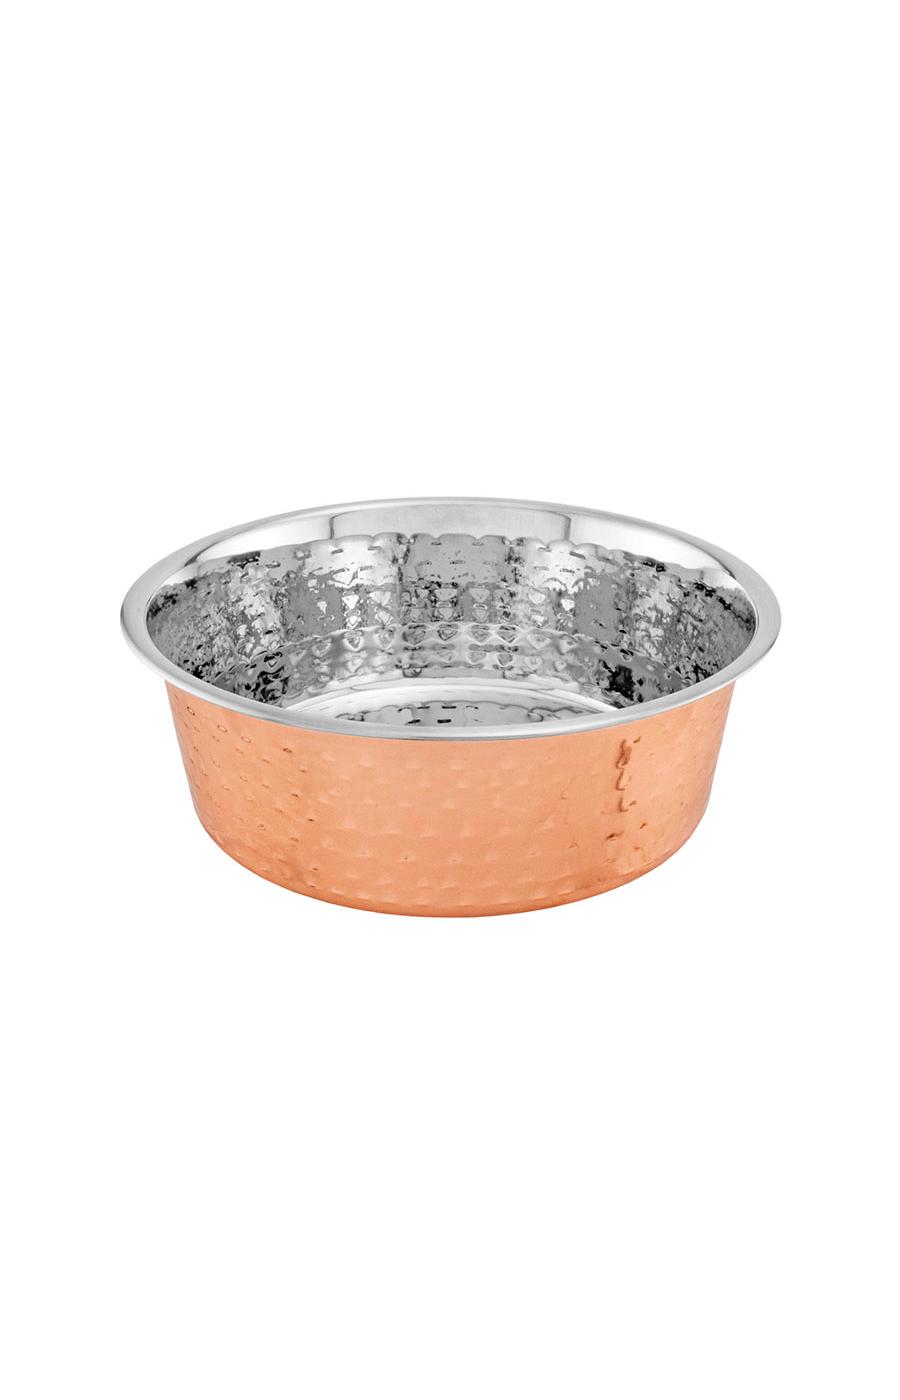 Ruffin' It 1 Quart Copper Non-Skid Stainless Steel Pet Bowl; image 1 of 2